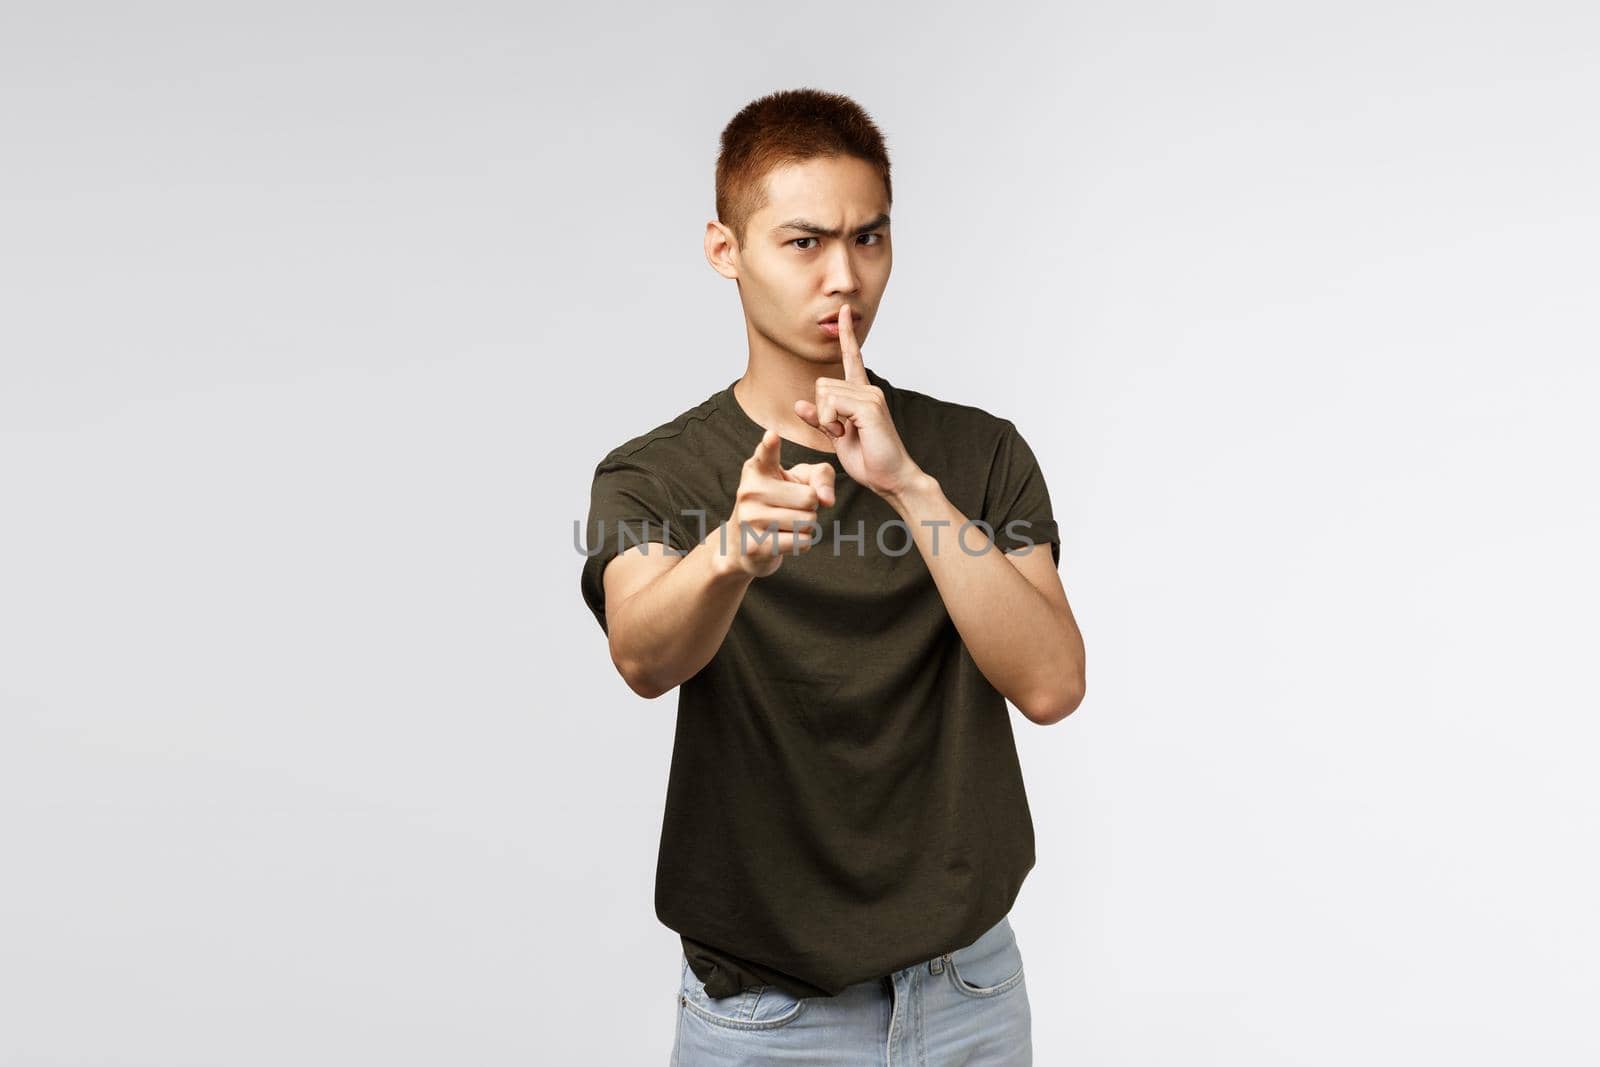 You better keep mouth shut. Portrait of angry serious-looking asian man pointing at camera and shushing scolding you for being noisy and loud, tell person be quiet and dont speek, grey background.